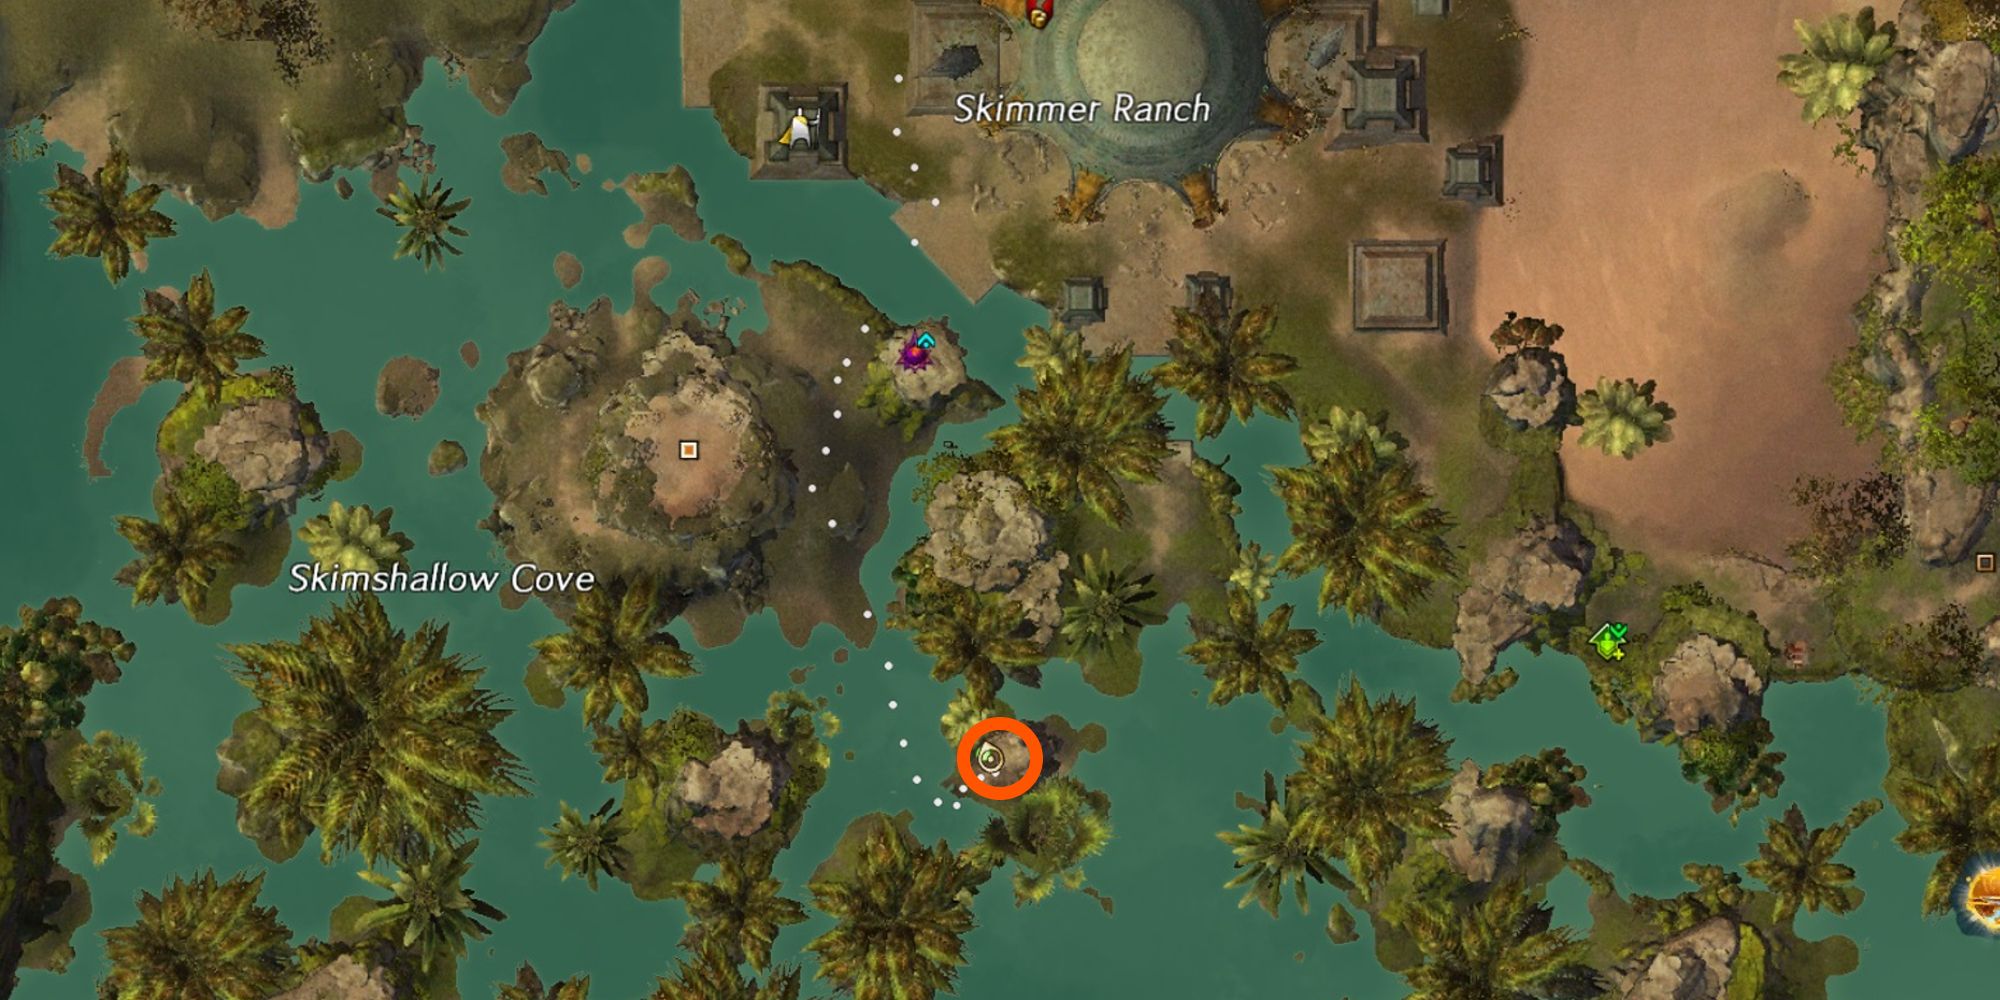 location of shadi's gloves on map